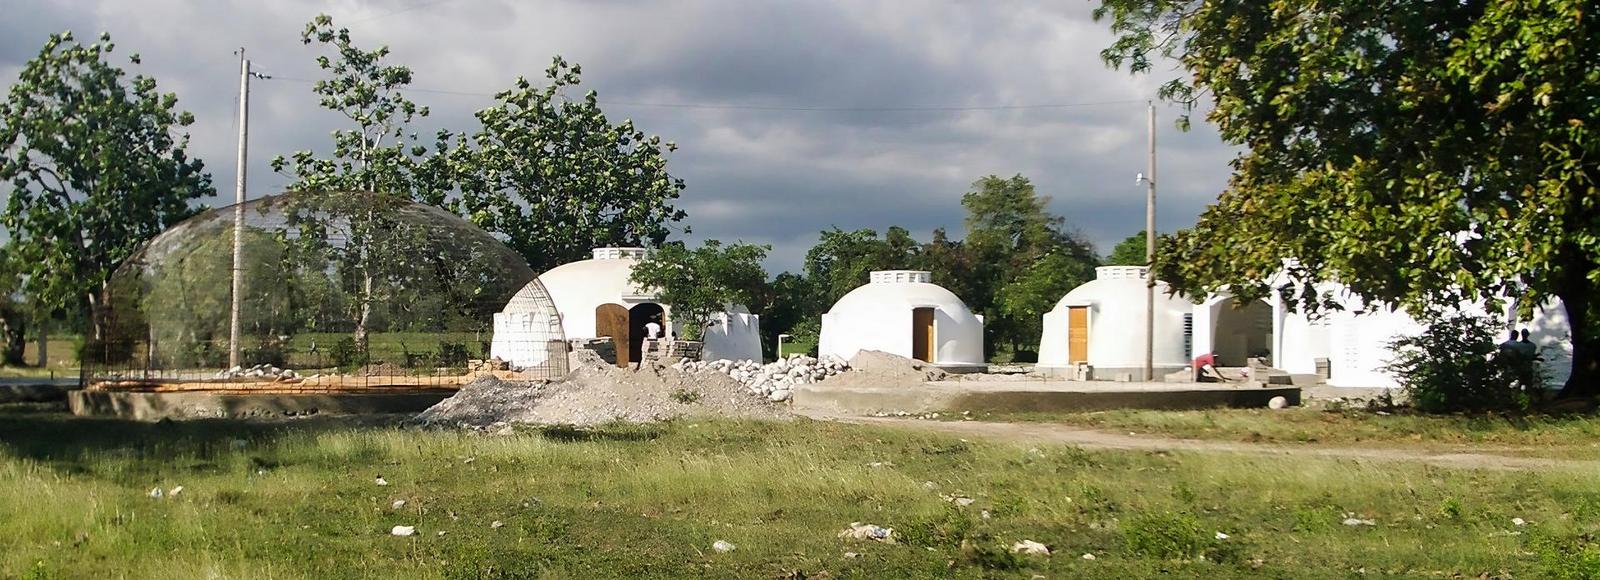 The First Group of Domes in Les Cayes, Haiti.